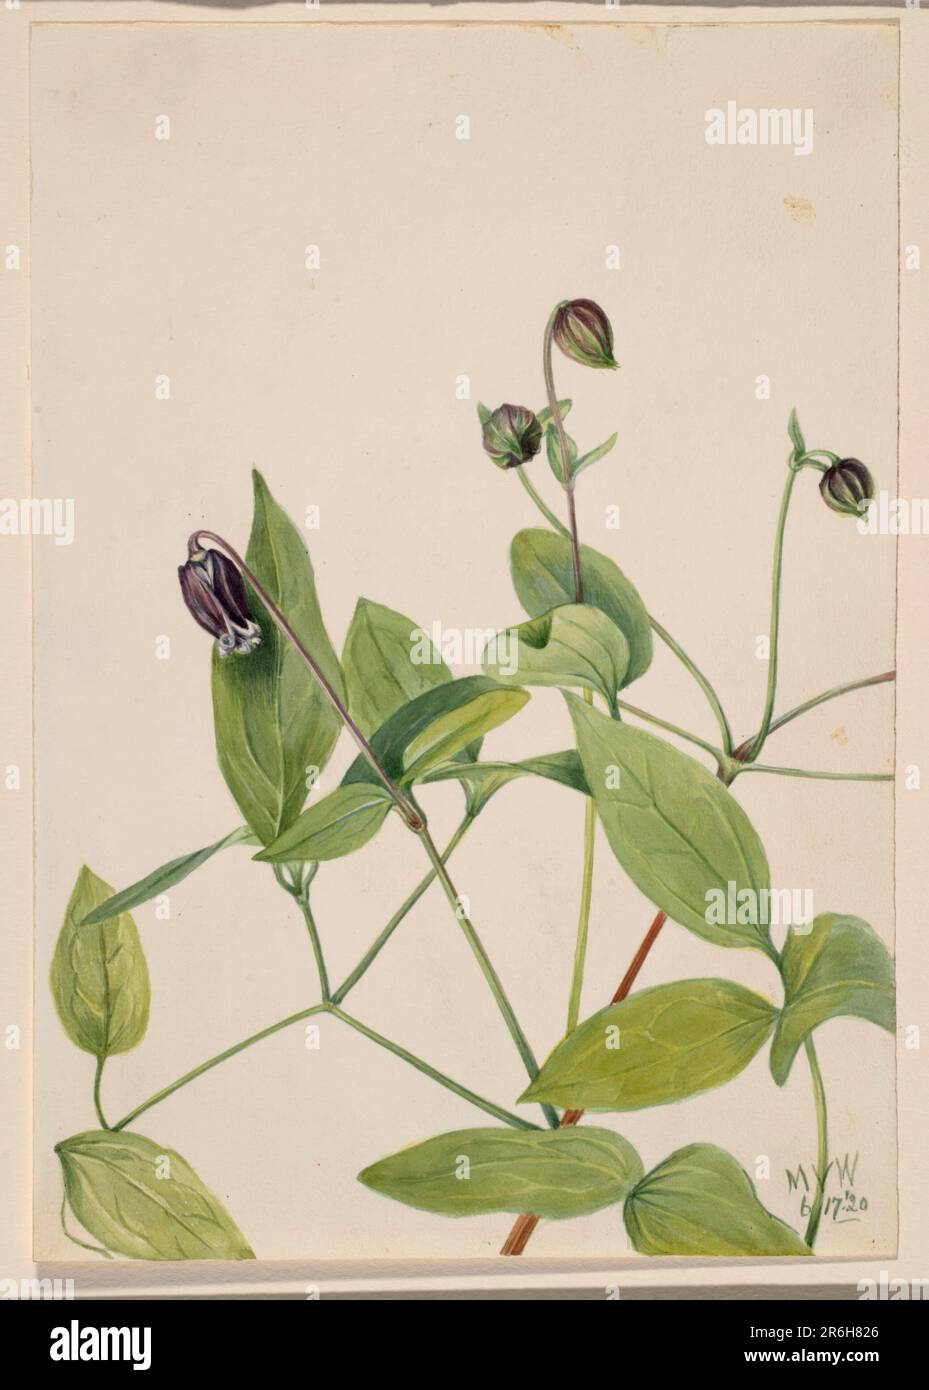 Leather Flower (Clematis viorna). Date: 1920. Watercolor on paper. Museum: Smithsonian American Art Museum. Stock Photo